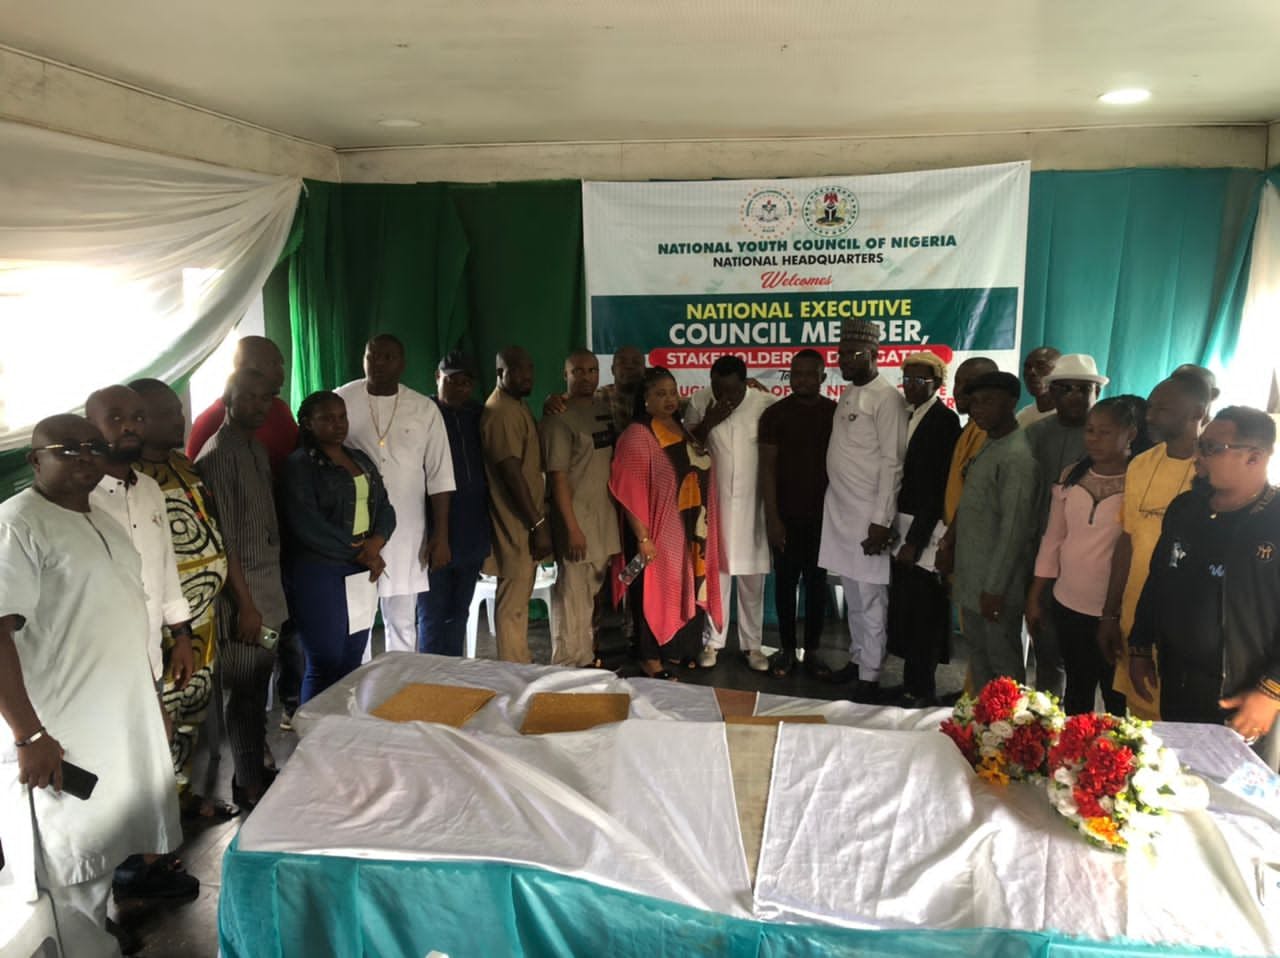 Sokubo inaugurates NYCN Imo State Chapter, assures readiness to assist state council